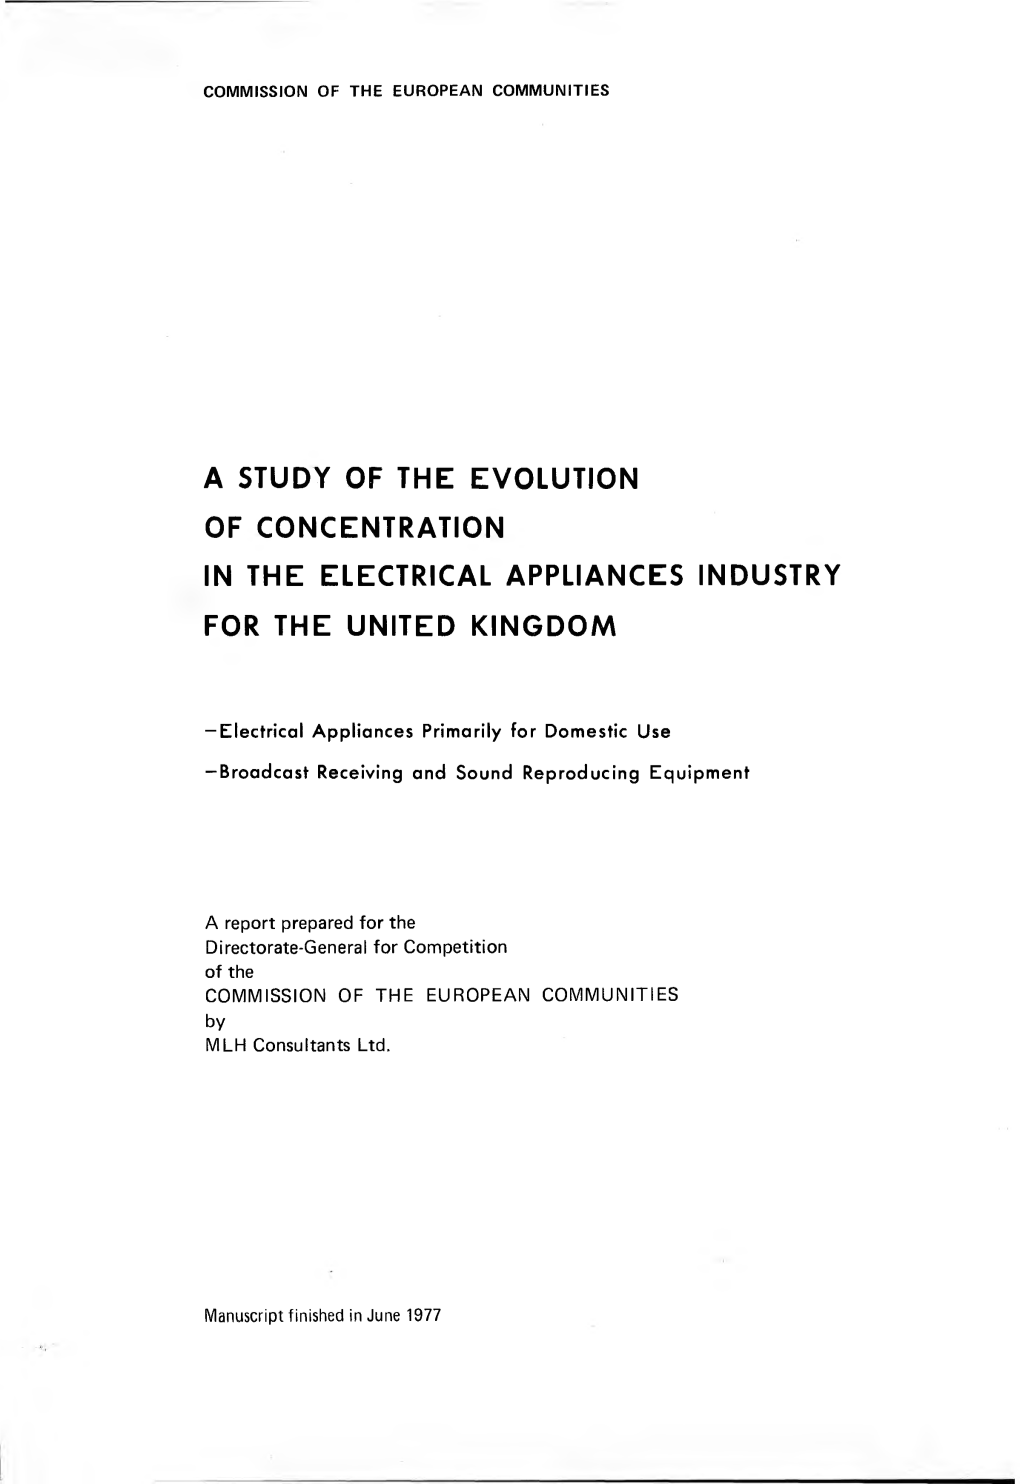 A Study of the Evolution of Concentration in the Electrical Appliances Industry for the United Kingdom